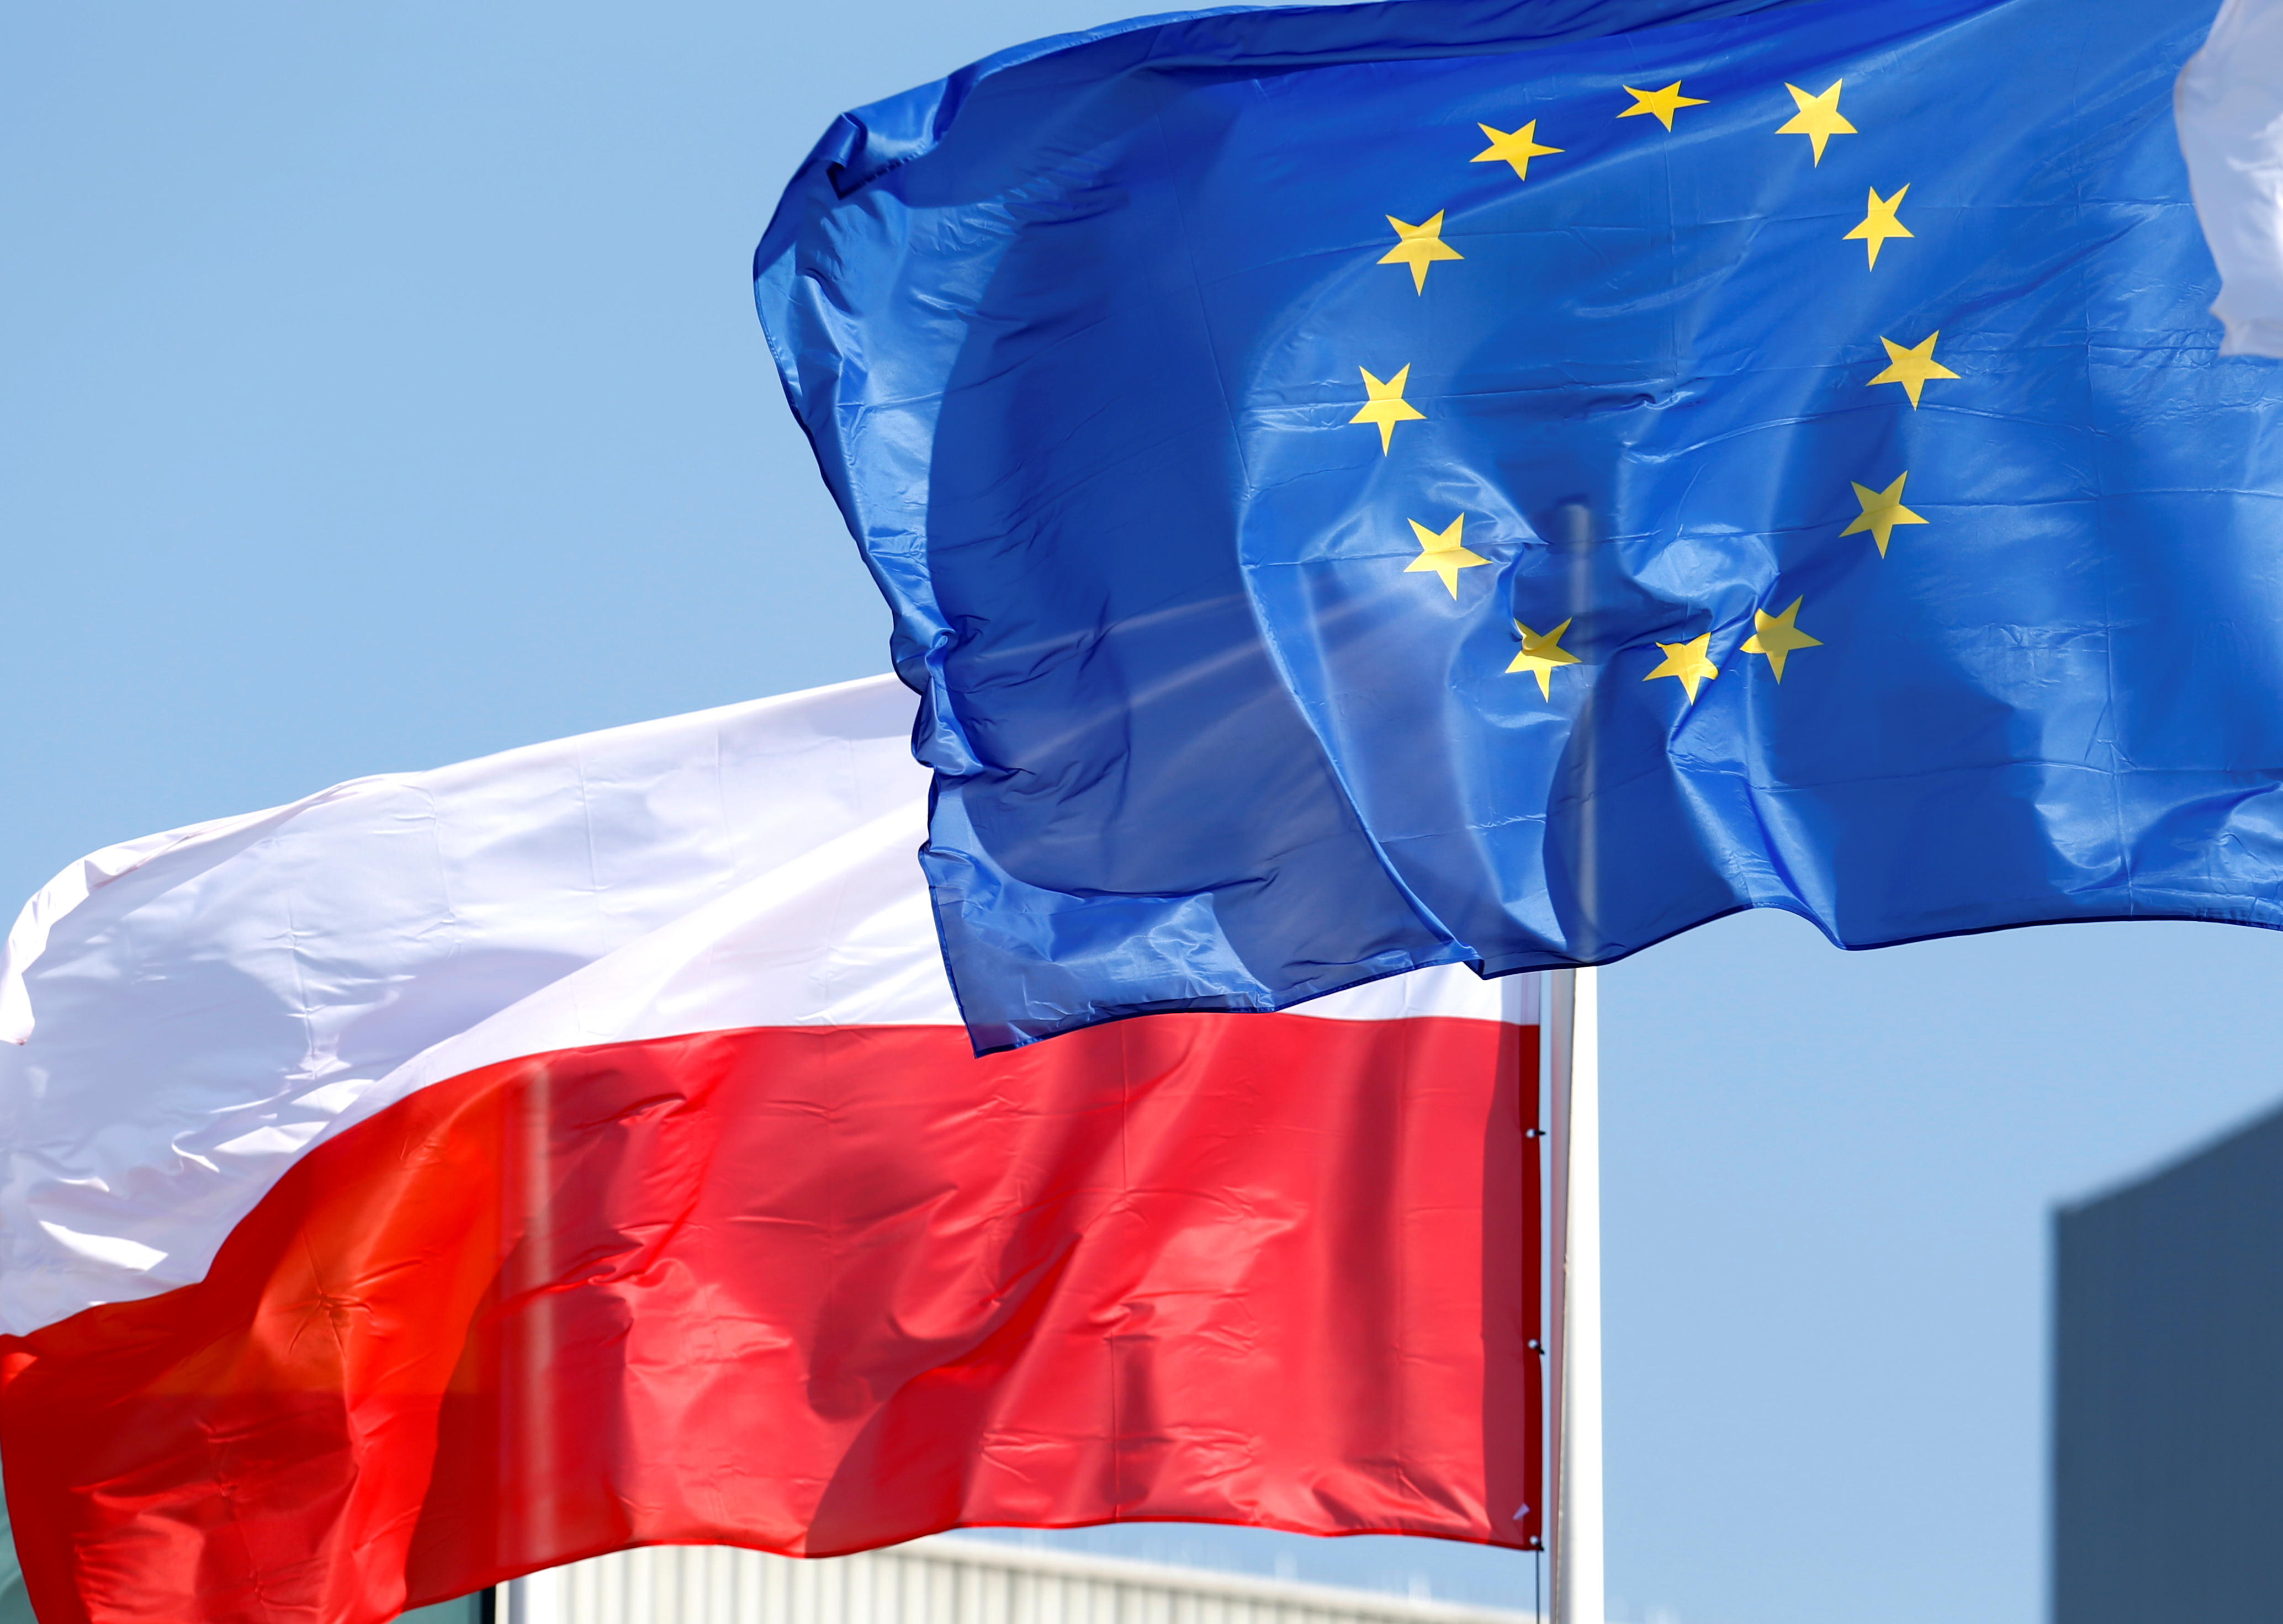 EU and Poland's flags flutter at the Orlen refinery in Mazeikiai